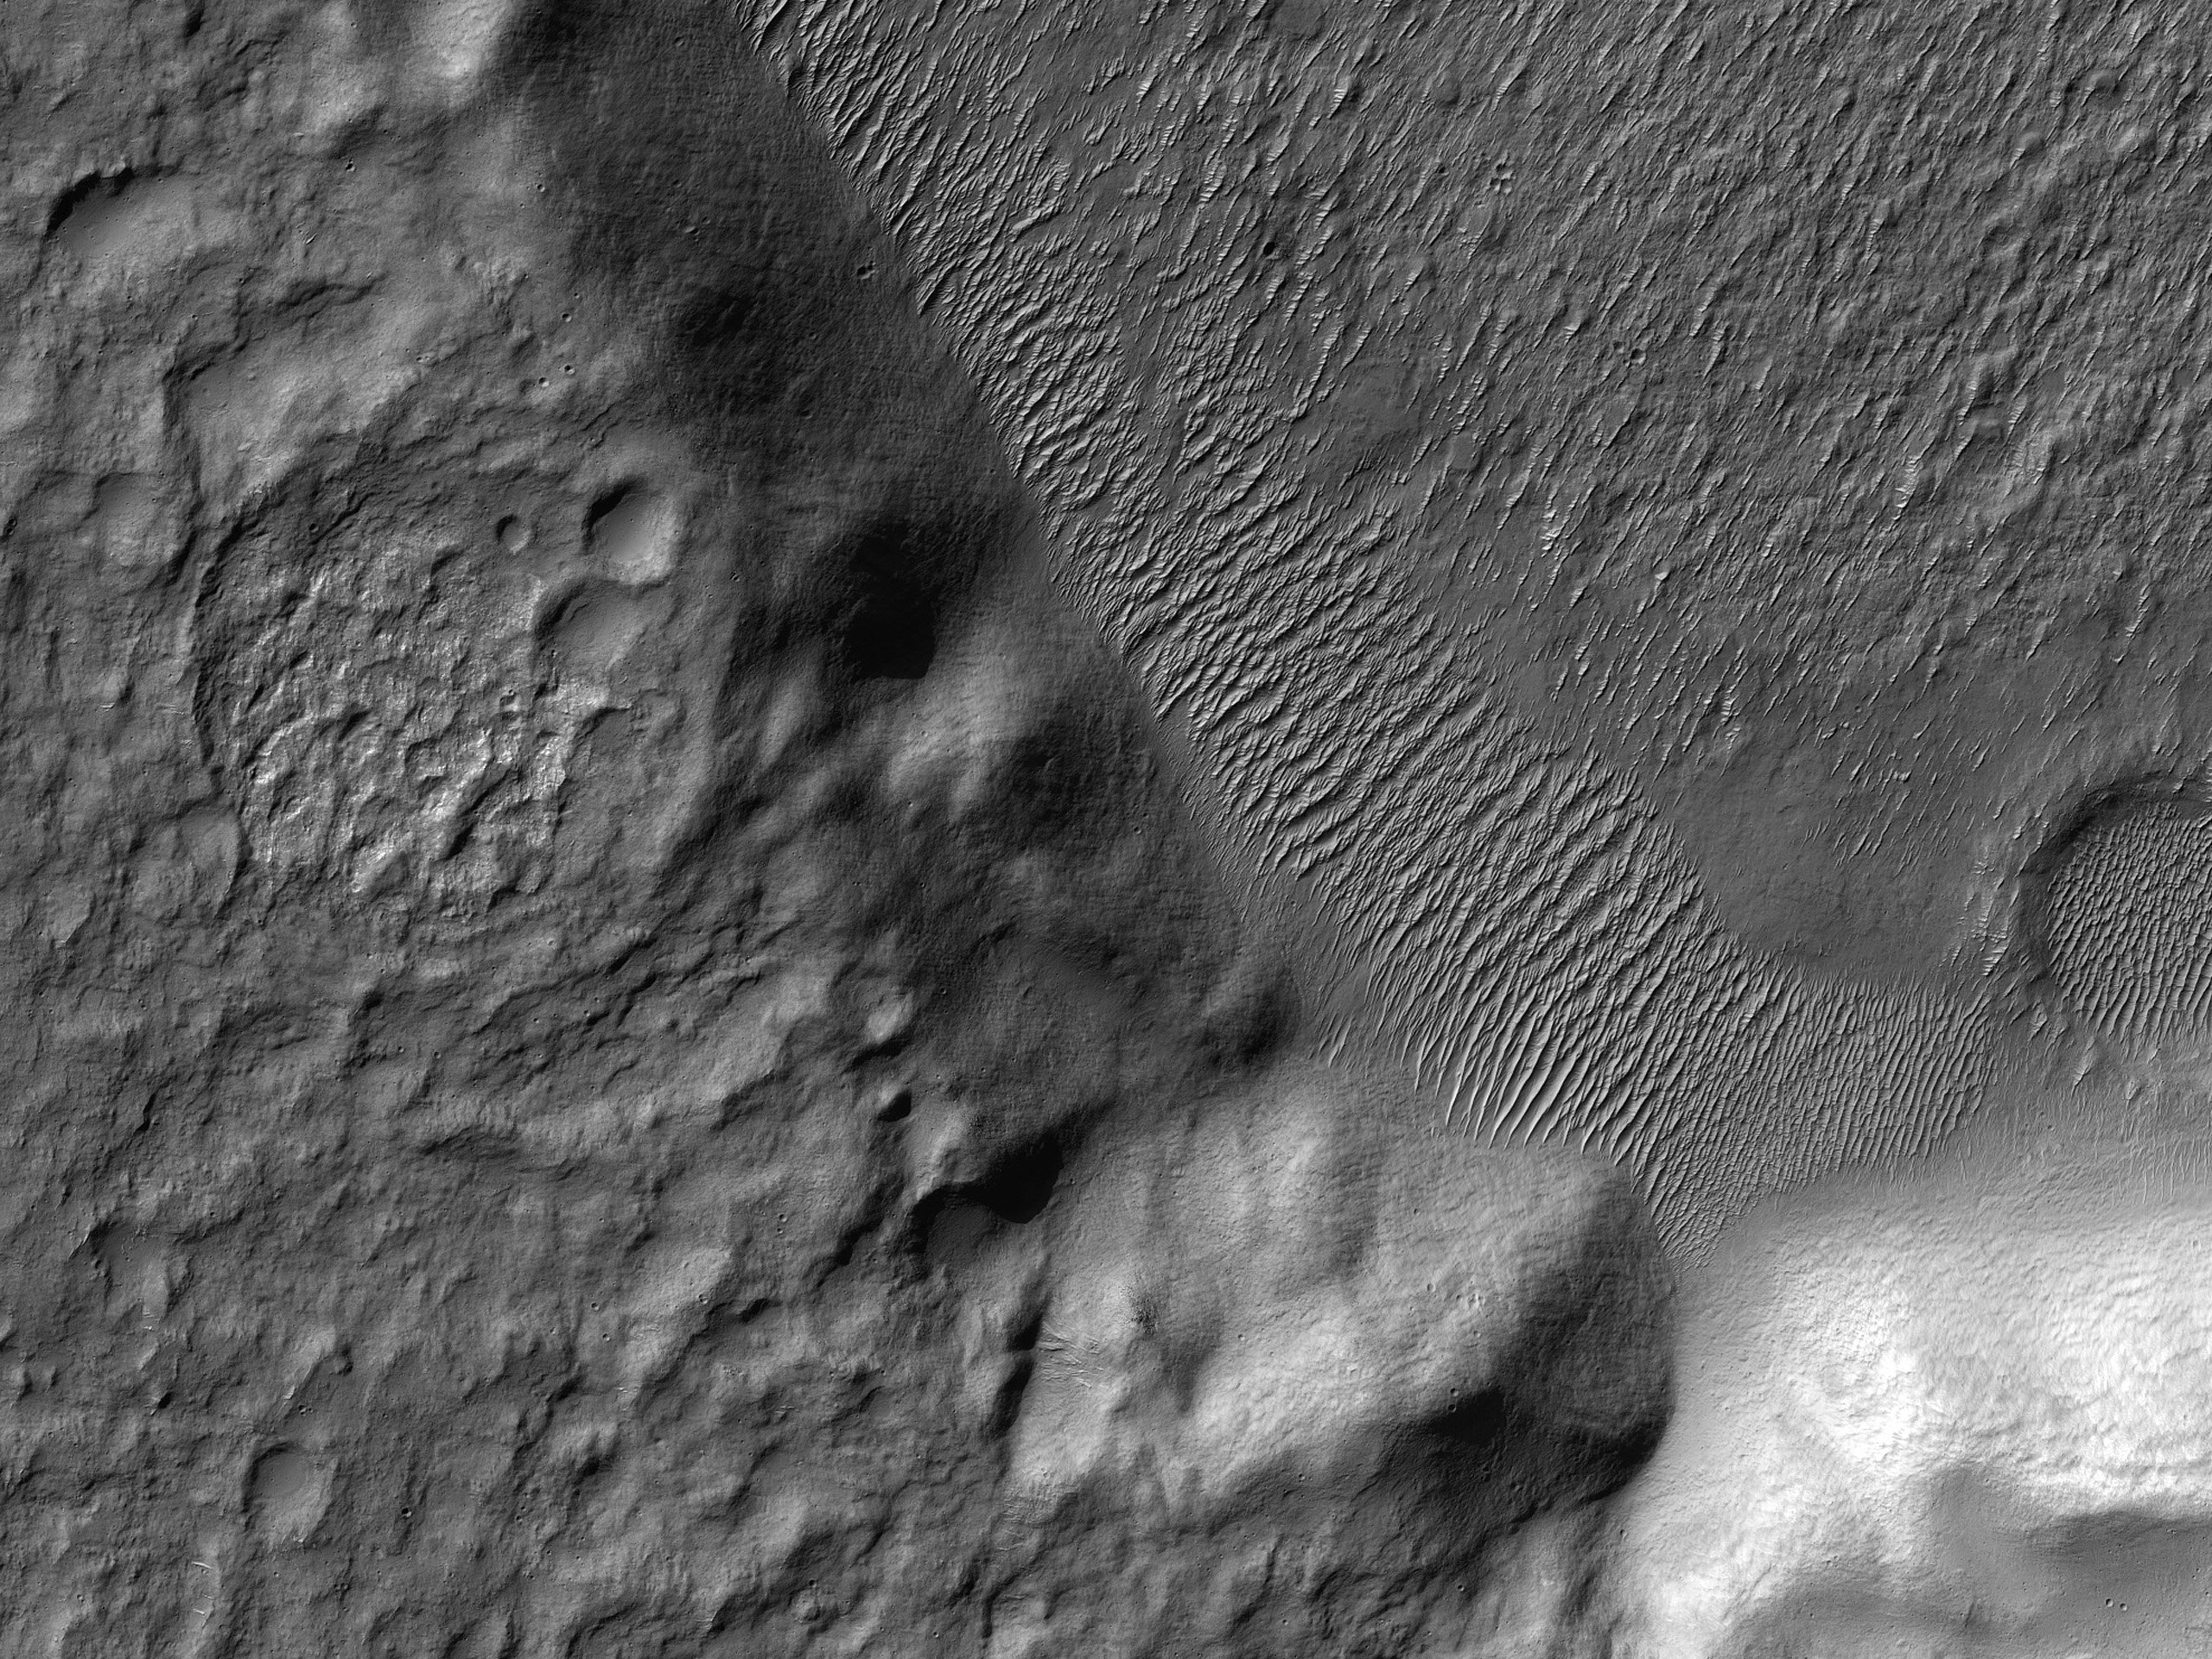 Possible Chloride-Rich Deposit adjacent to Crater Rim